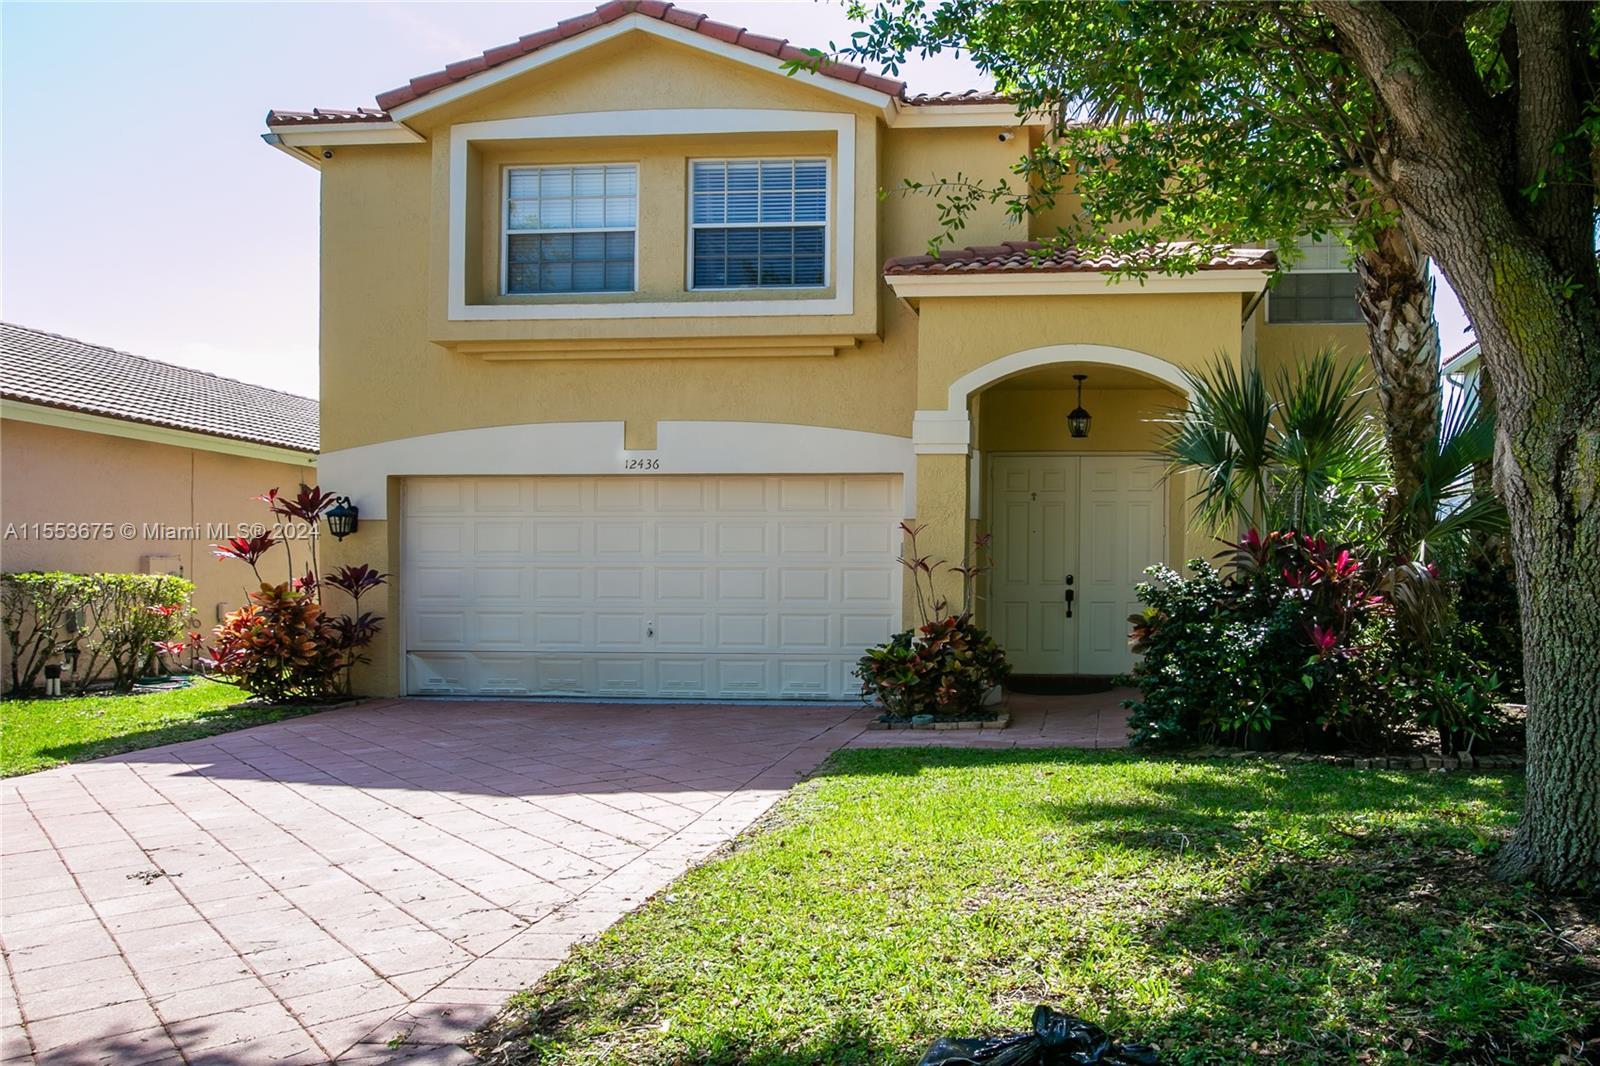 Photo of 12436 NW 53rd St in Coral Springs, FL